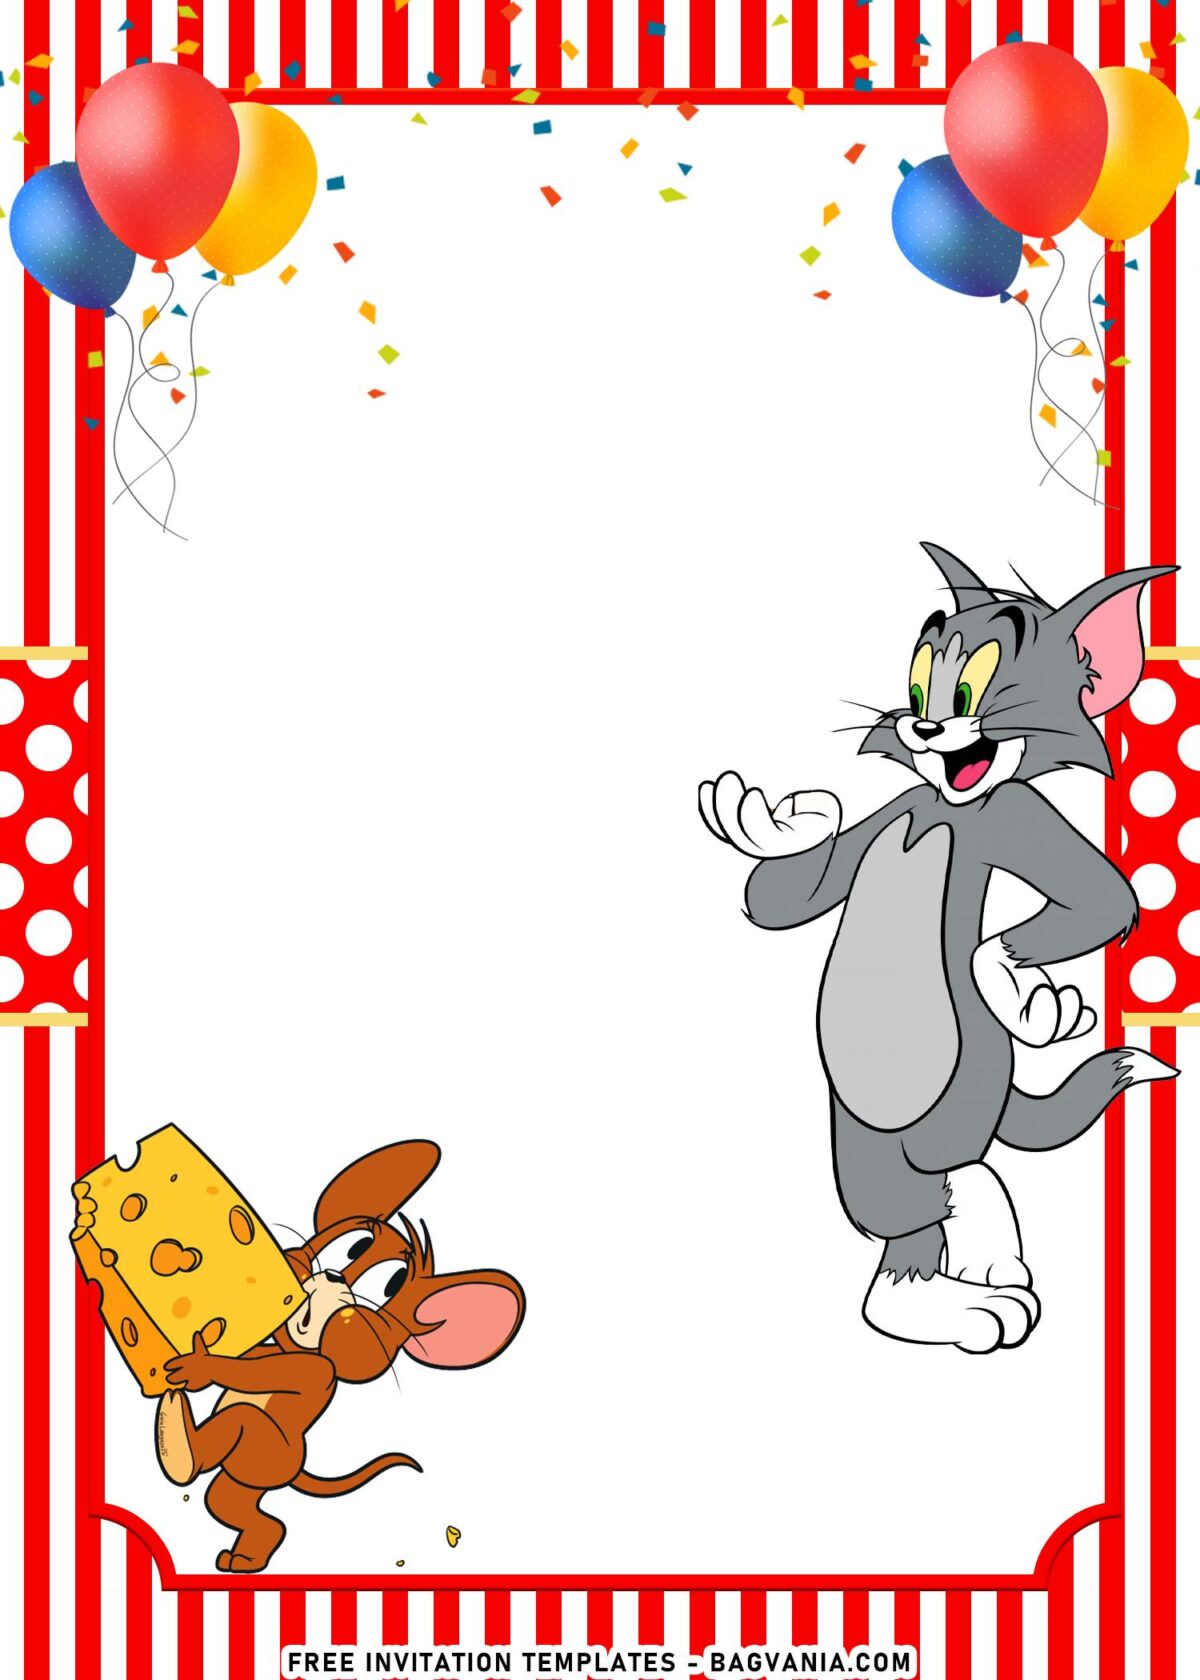 10+ Cartoon Tom And Jerry Birthday Invitation Templates with Jerry is holding cheese